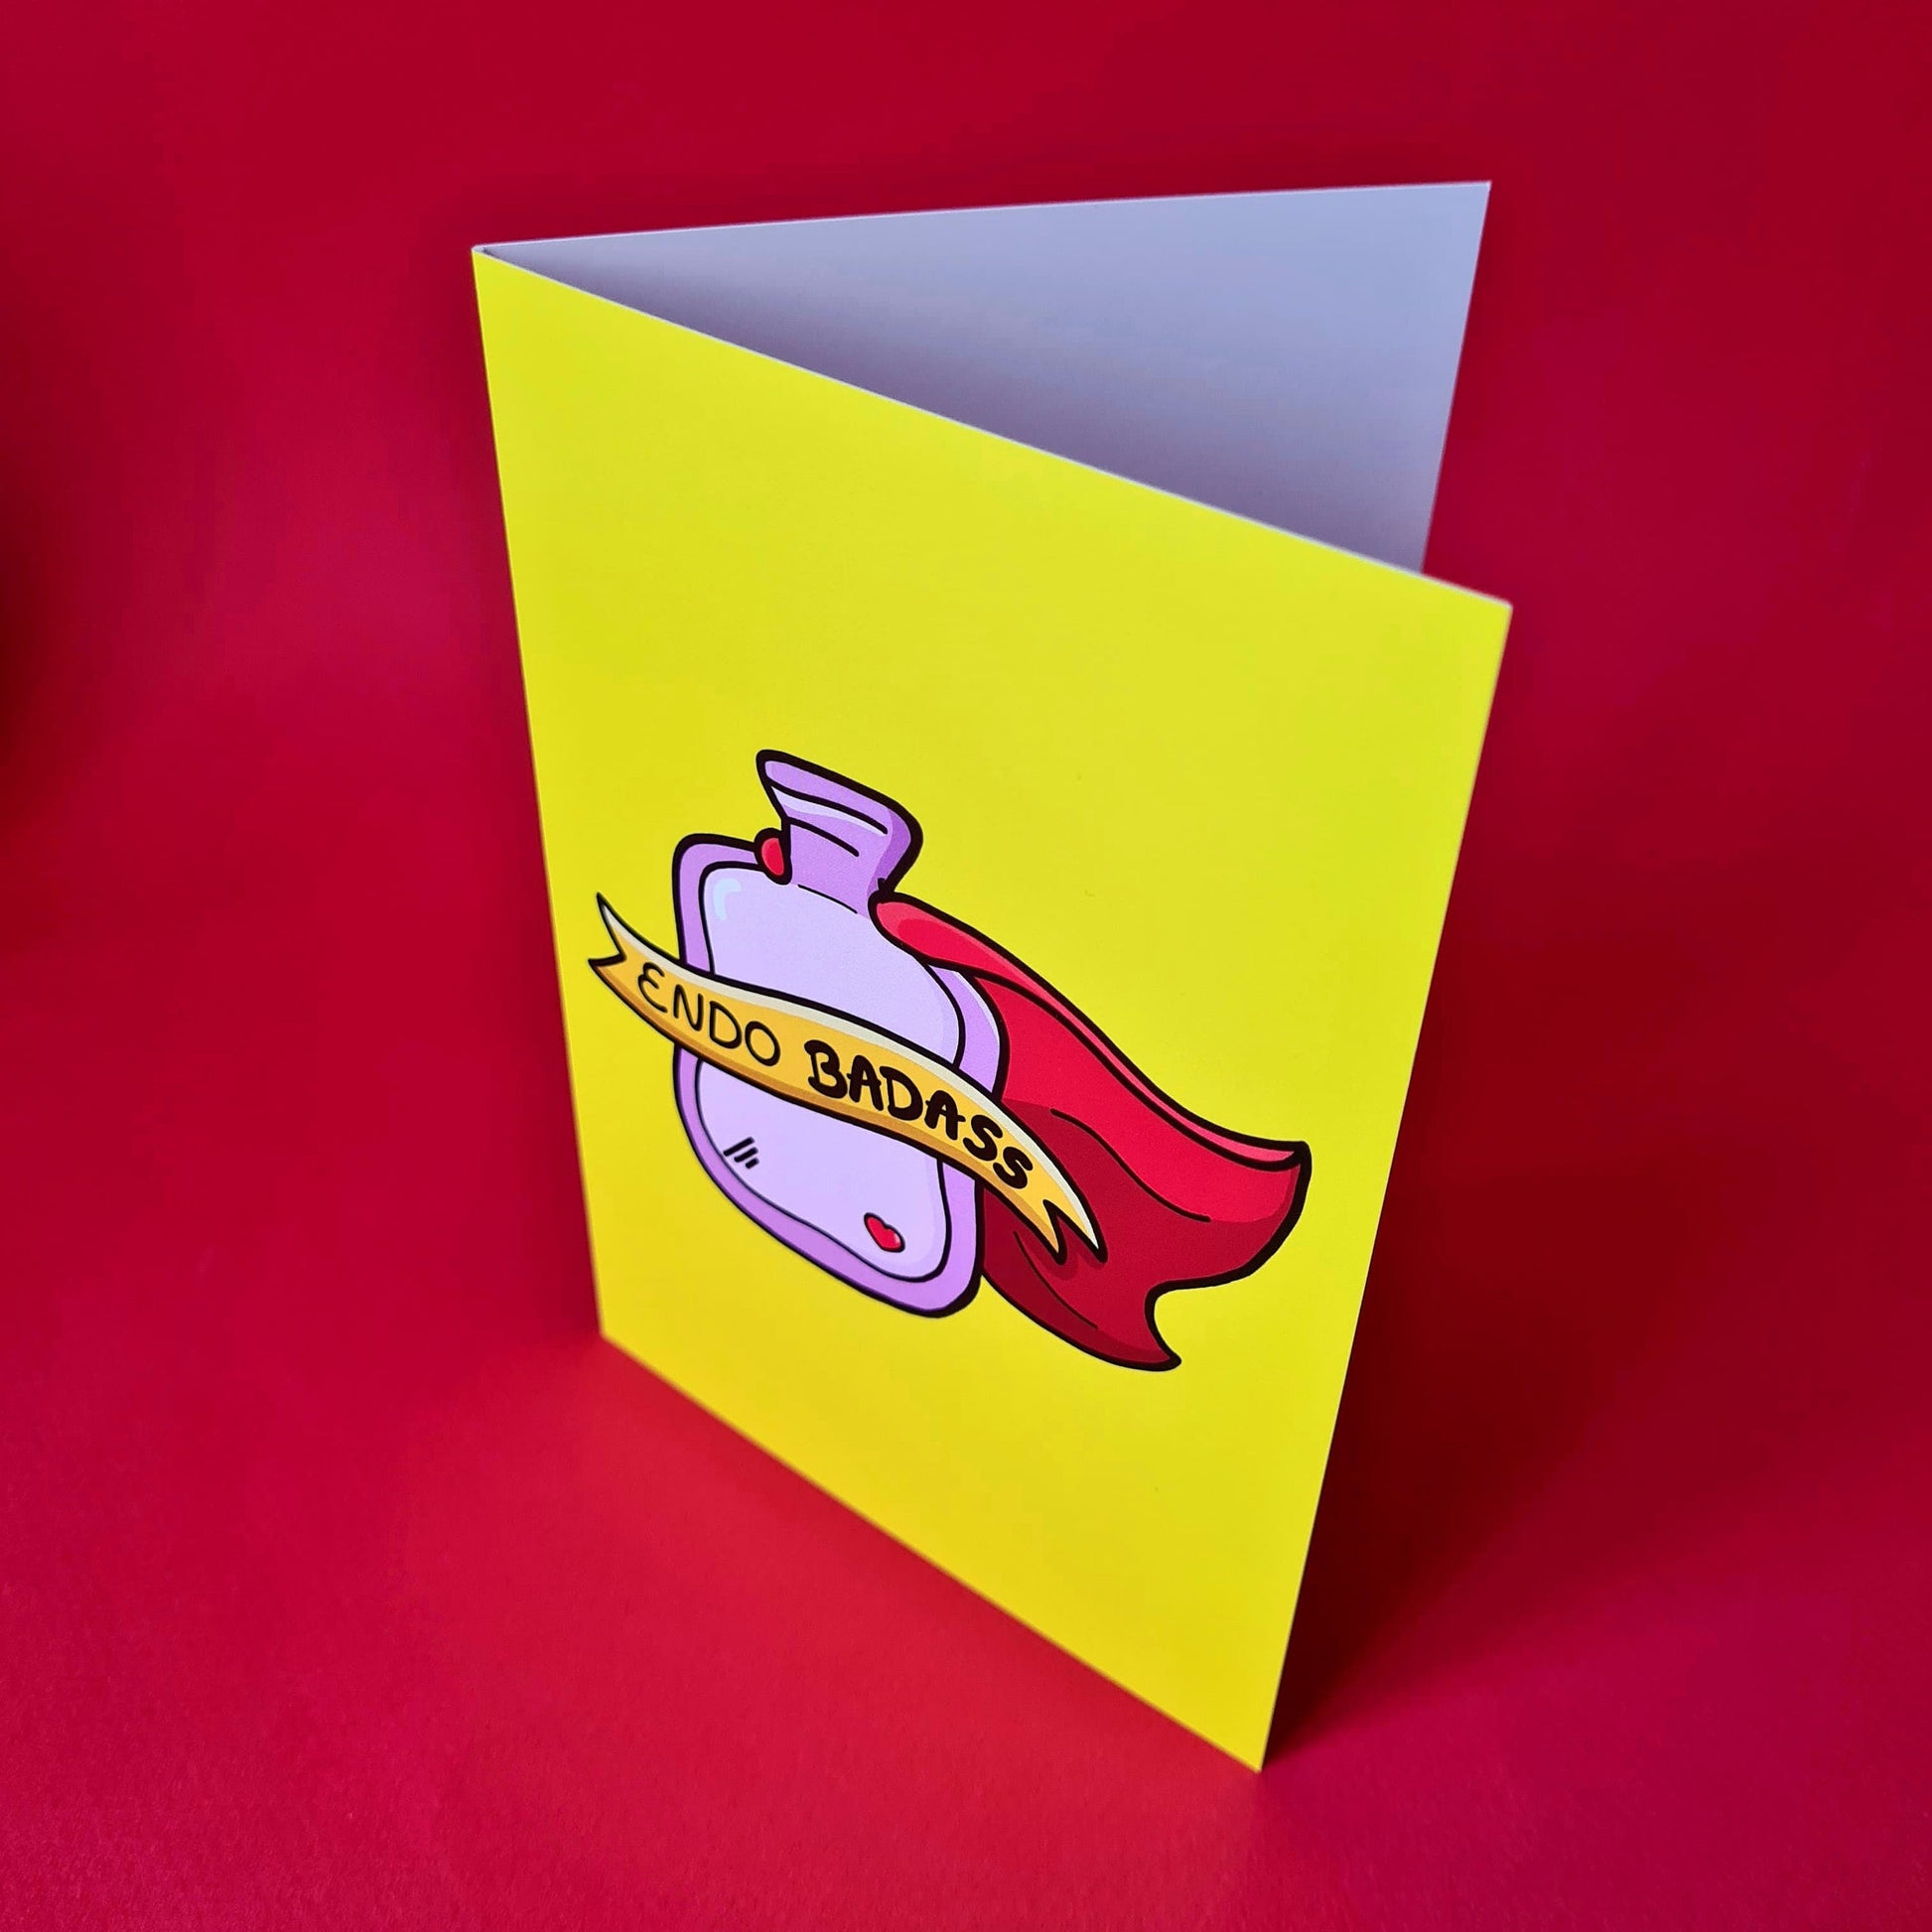 The Endo Badass Card - Endometriosis on a red background. The yellow based card features a pink hot waterbottle with a small red heart, a red cape and a yellow banner across reading 'endo badass'. Hand drawn design is raising awareness for Endometriosis and pelvic pain.